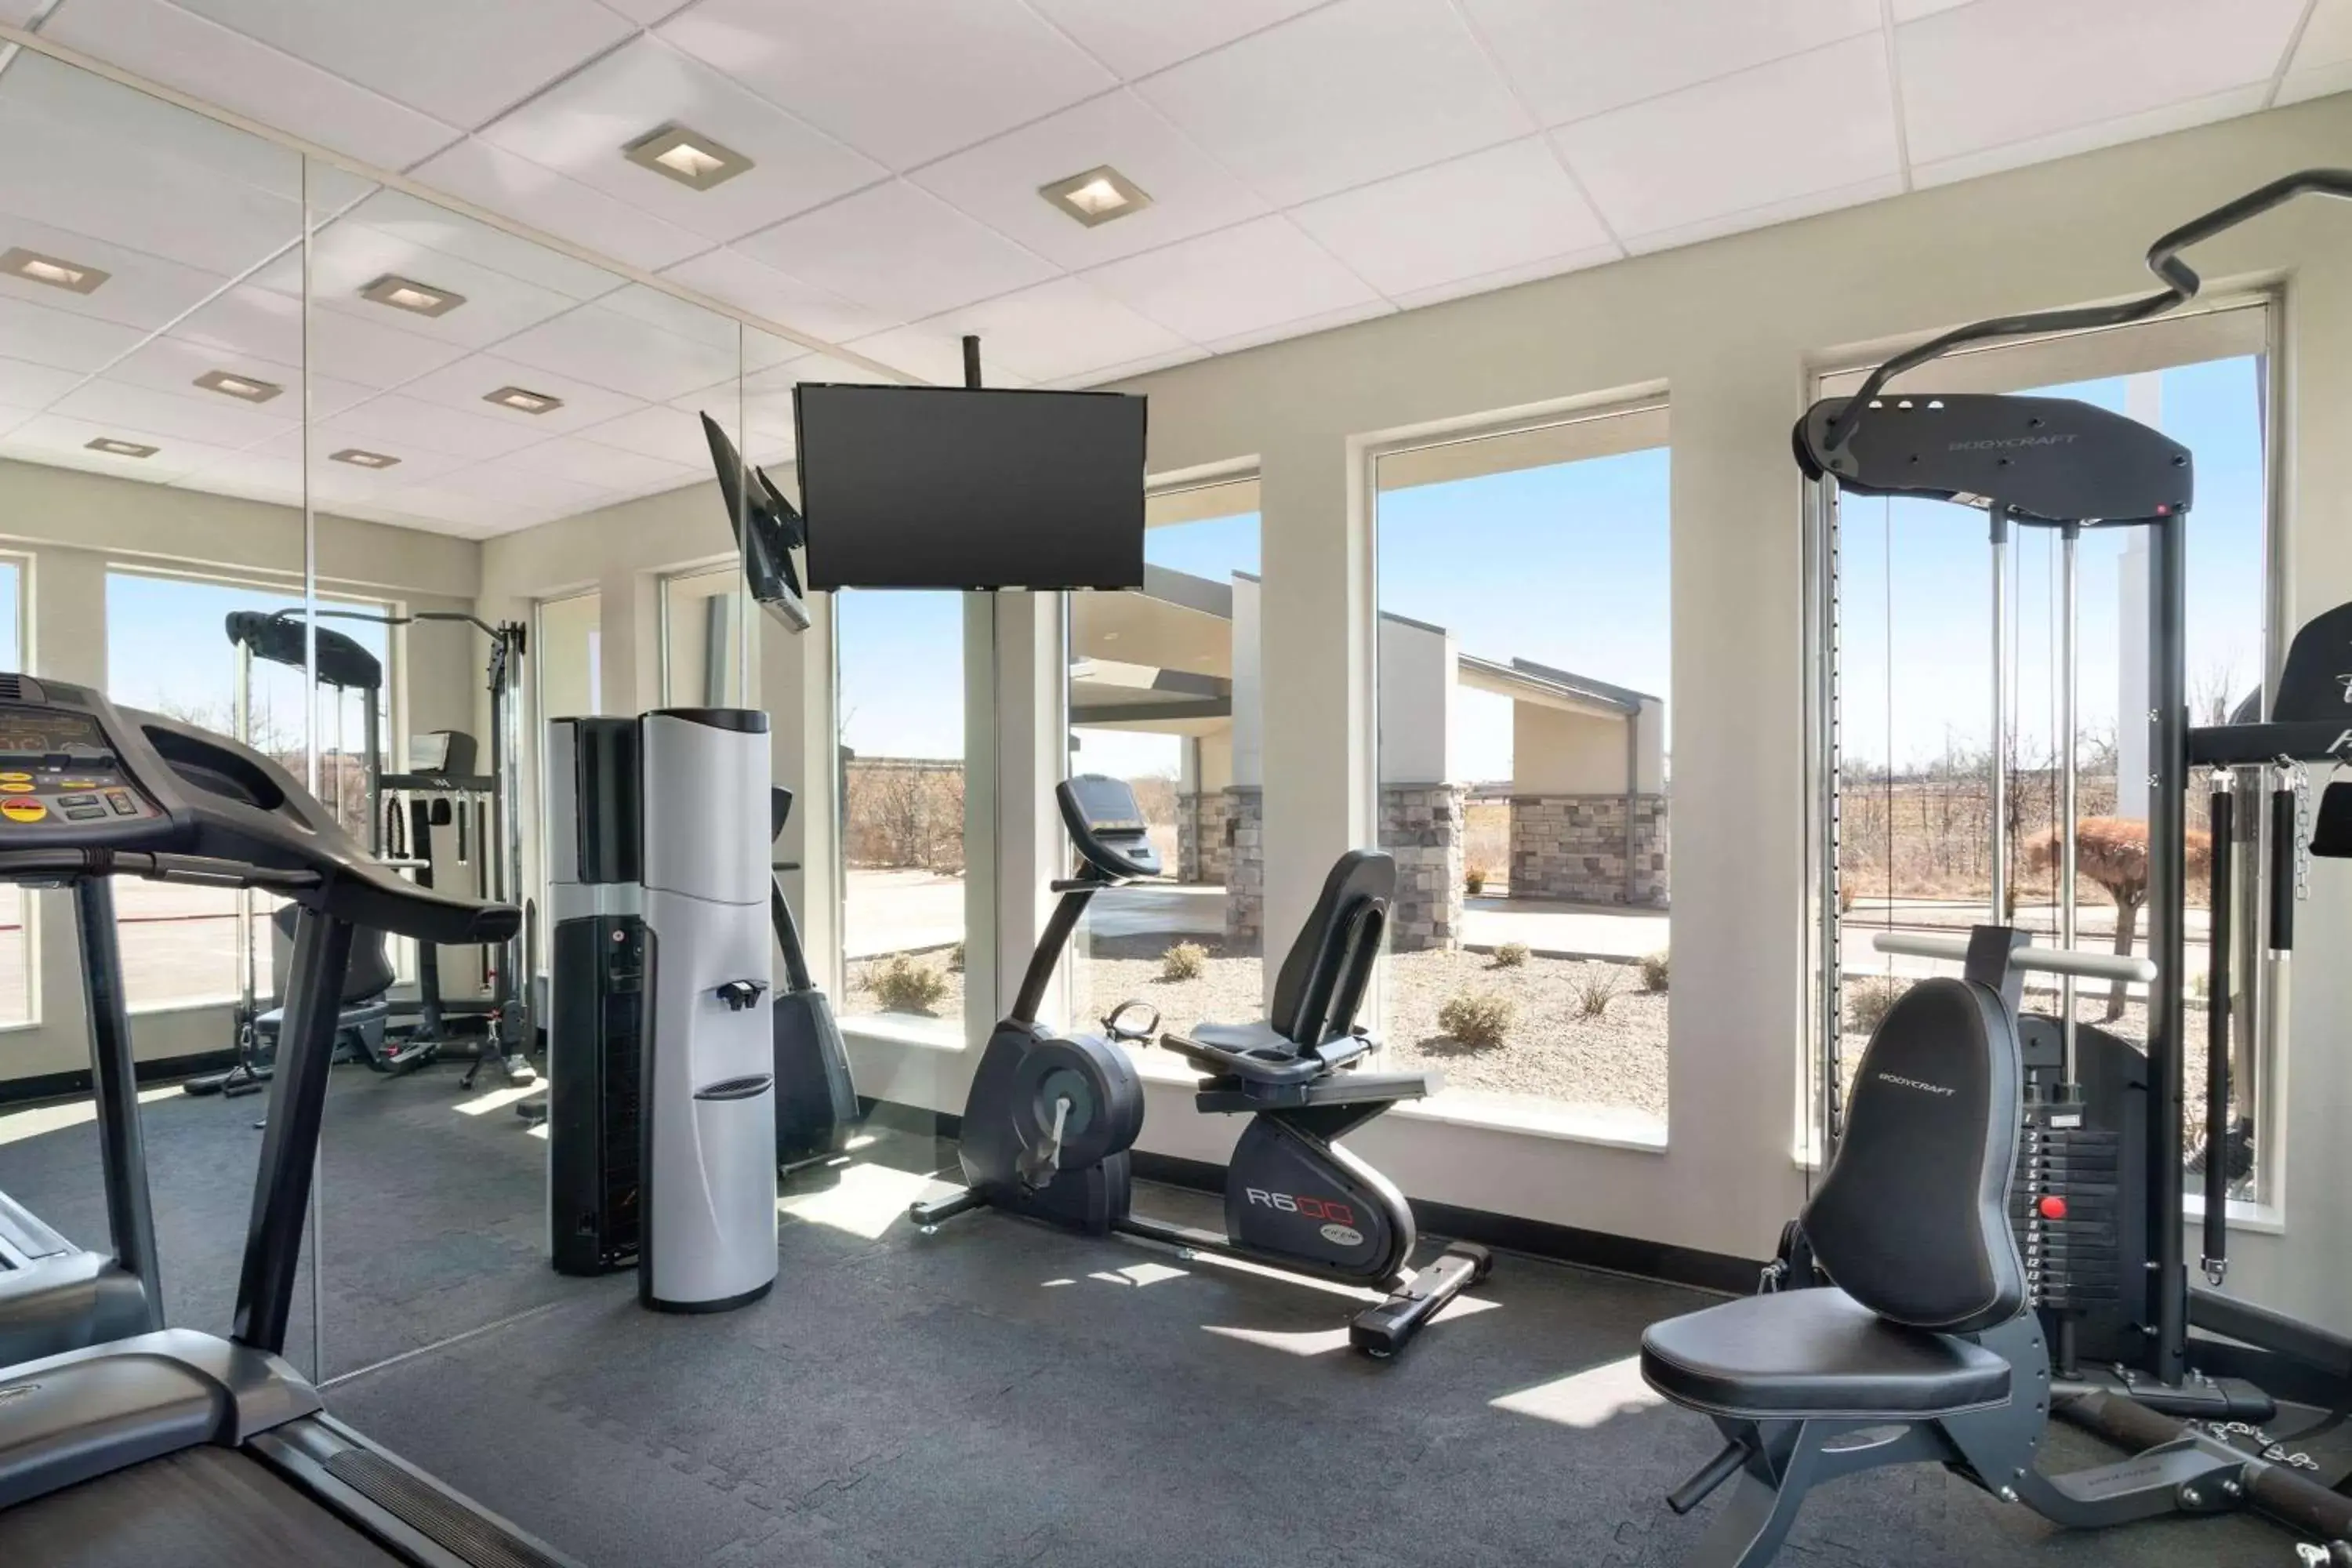 Fitness centre/facilities, Fitness Center/Facilities in Baymont Inn & Suites Shawnee